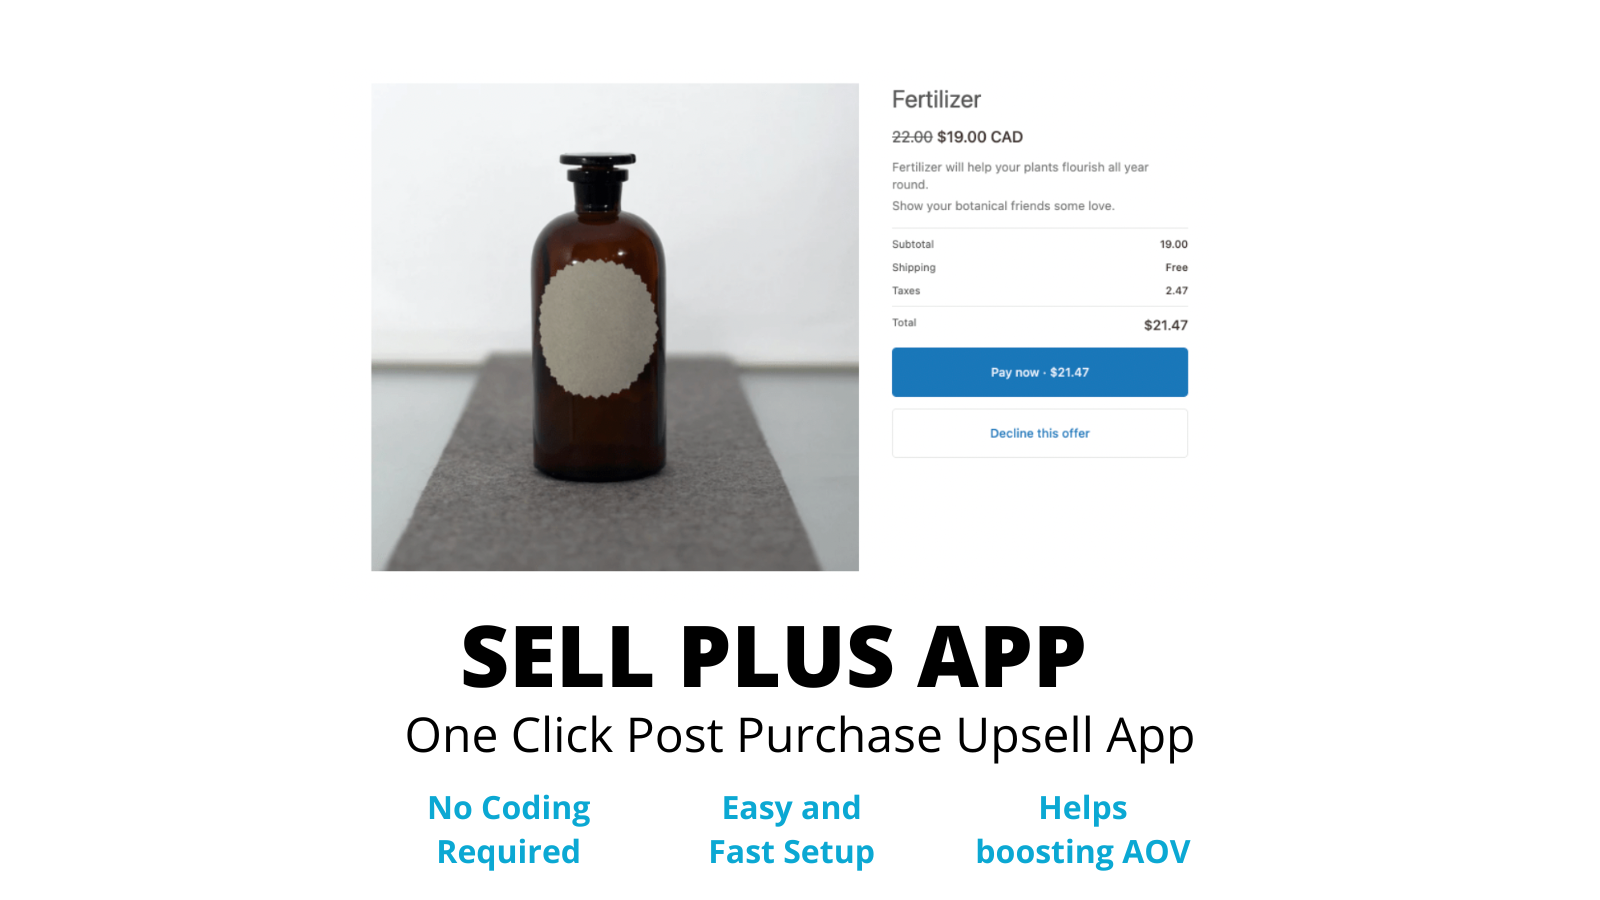 One Click Post Purchase UpSell App